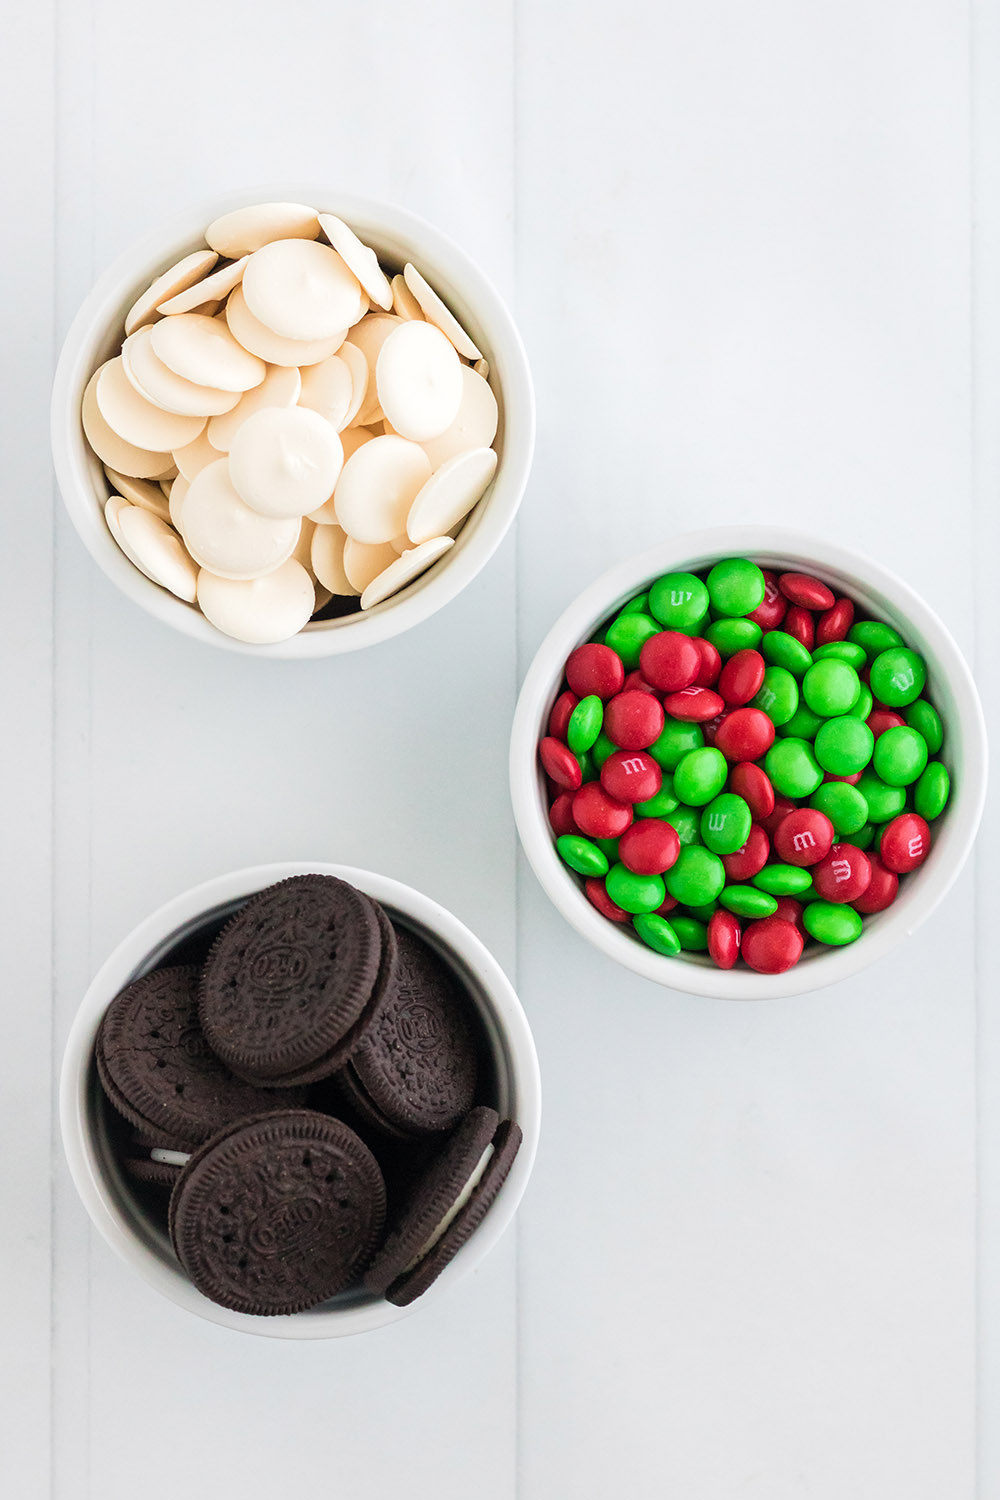 White candy melts, OREO cookies, and red and green M&M candies in bowls. 